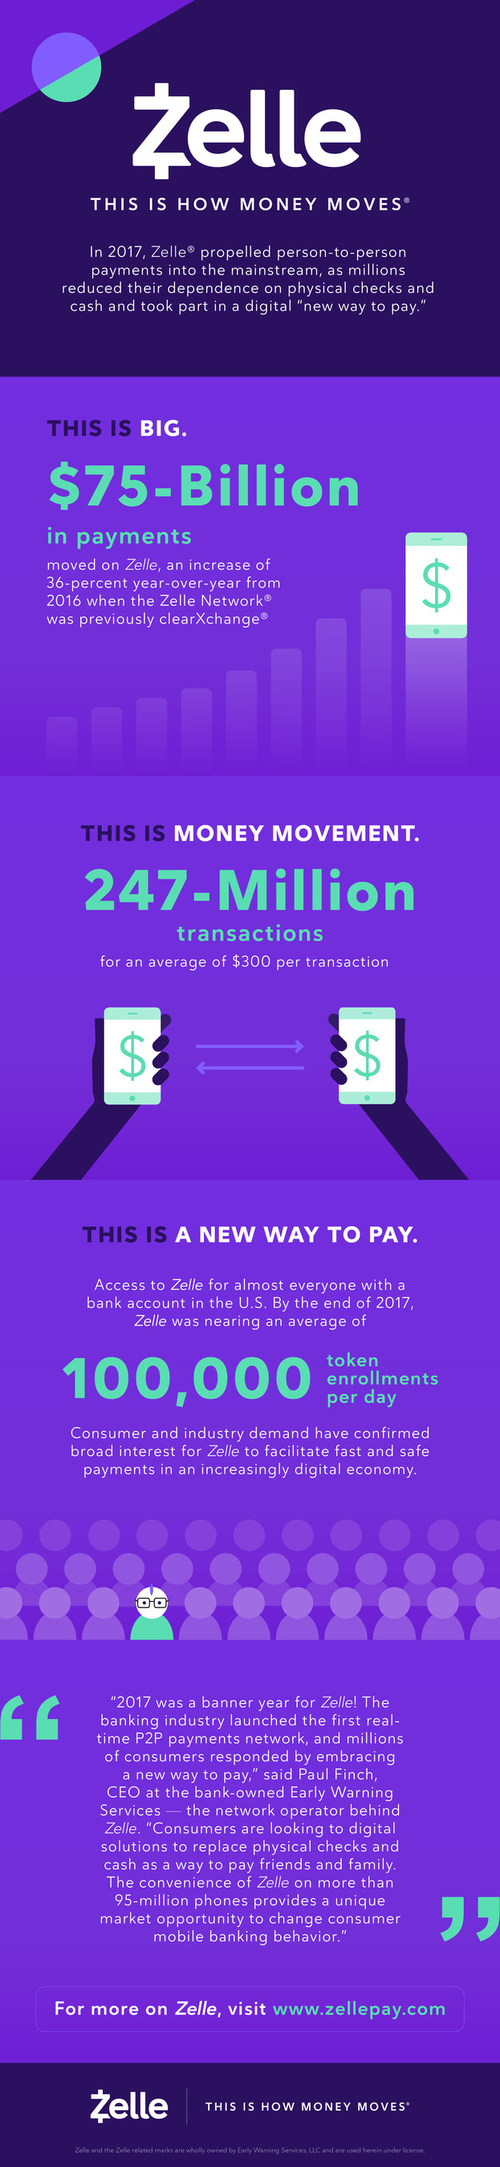 Zelle, This is How Money Moves